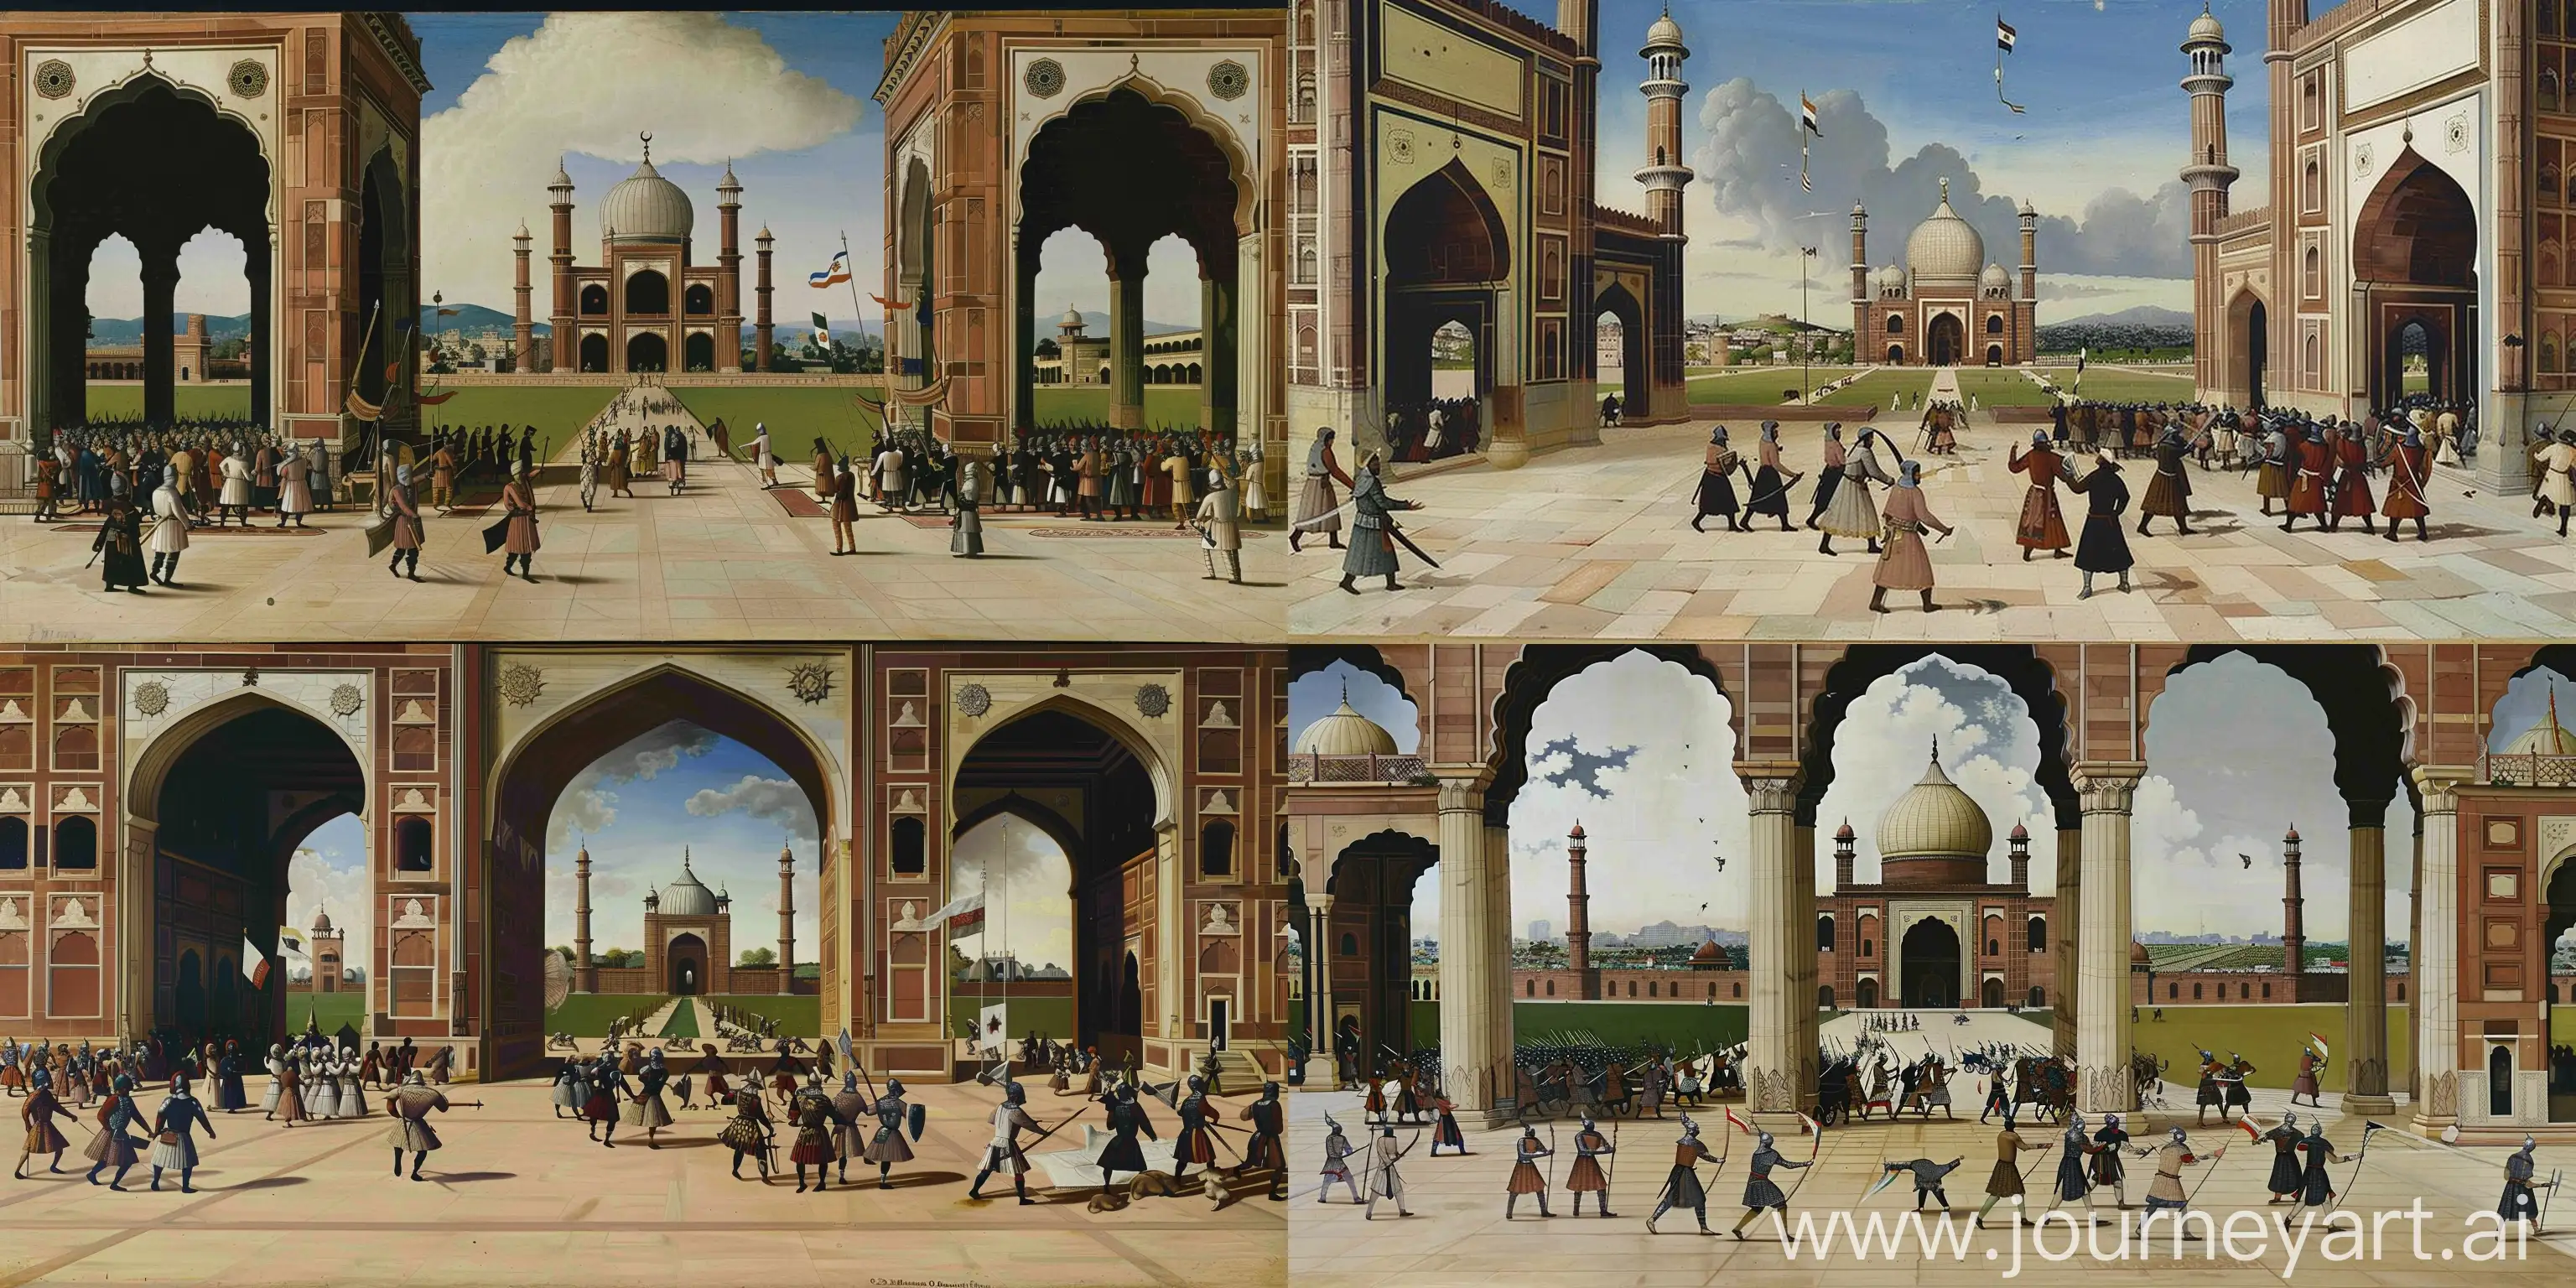 medieval Renaissance painting depicting a medieval battle scene between saracen knights and crusaders, in the courtyard of "Delhi Jama masjid", lush green field in the background, cloudy sky, Knights carrying flags and banners, dark weather --ar 6:3 --v 6 --sref https://cdn.discordapp.com/attachments/1209182749441654865/1247644078070566992/Raffaello_-_Spozalizio_-_Web_Gallery_of_Art.jpg?ex=66621818&is=6660c698&hm=49cdfba24c1daa1010a13a6cfed345f6e2155a91c150a1aeace8309371da7c58& --cref <https://cdn.discordapp.com/attachments/1213041174428782623/1248168666818678875/jama-masjid-delhi.jpg?ex=6662af28&is=66615da8&hm=4a5c245cbffdfe8a32bb2e1f4a8a918bdcfa7493dfdf76f23d130c91854c26d0&> --cw 99 --sw 999 --q 1